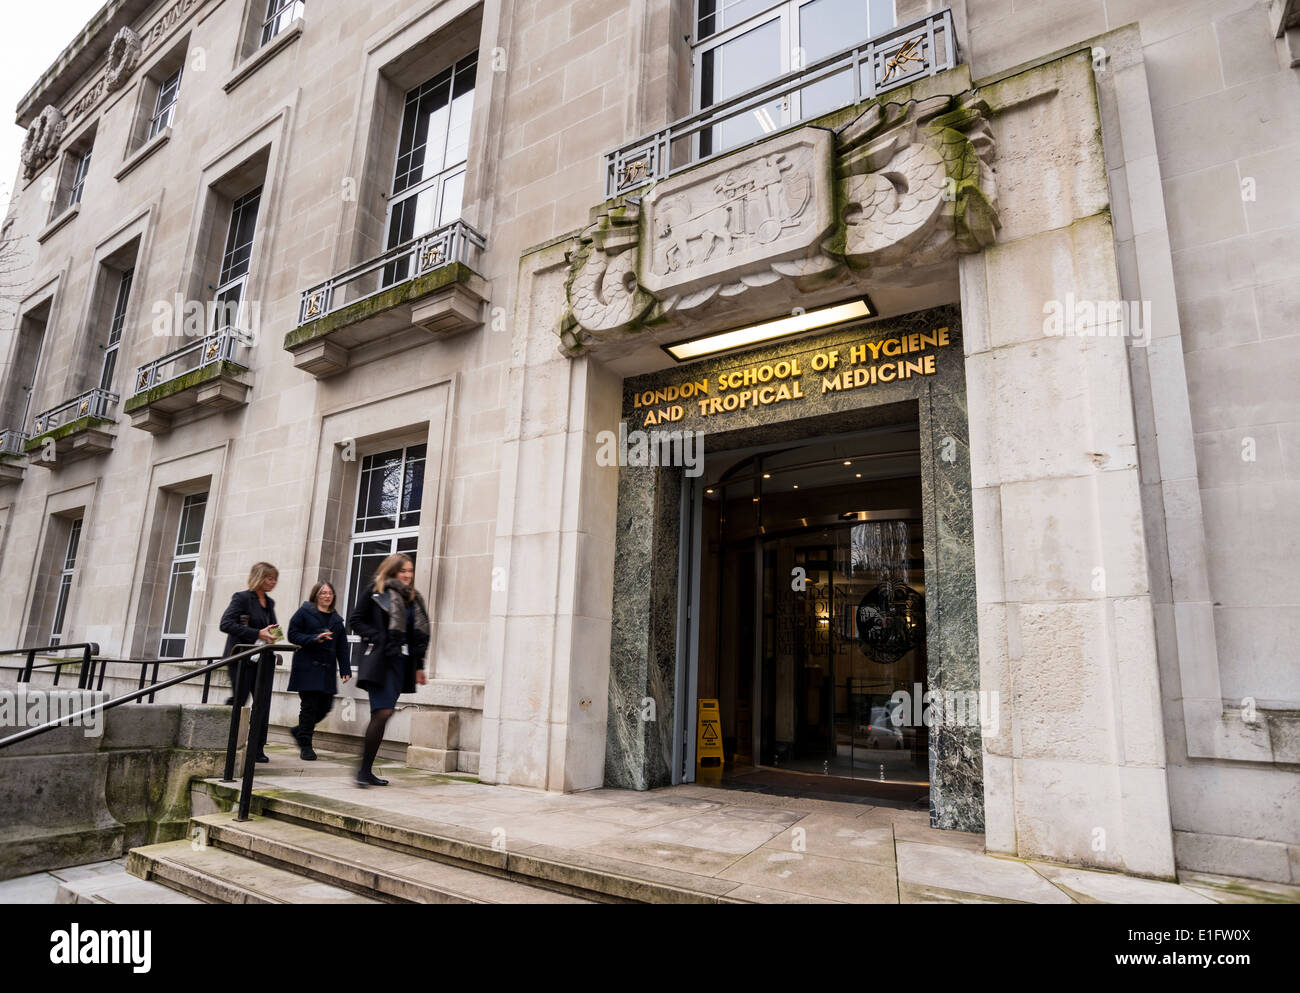 The main entrance to London School of Hygiene and Tropical Medicine in London, UK Stock Photo